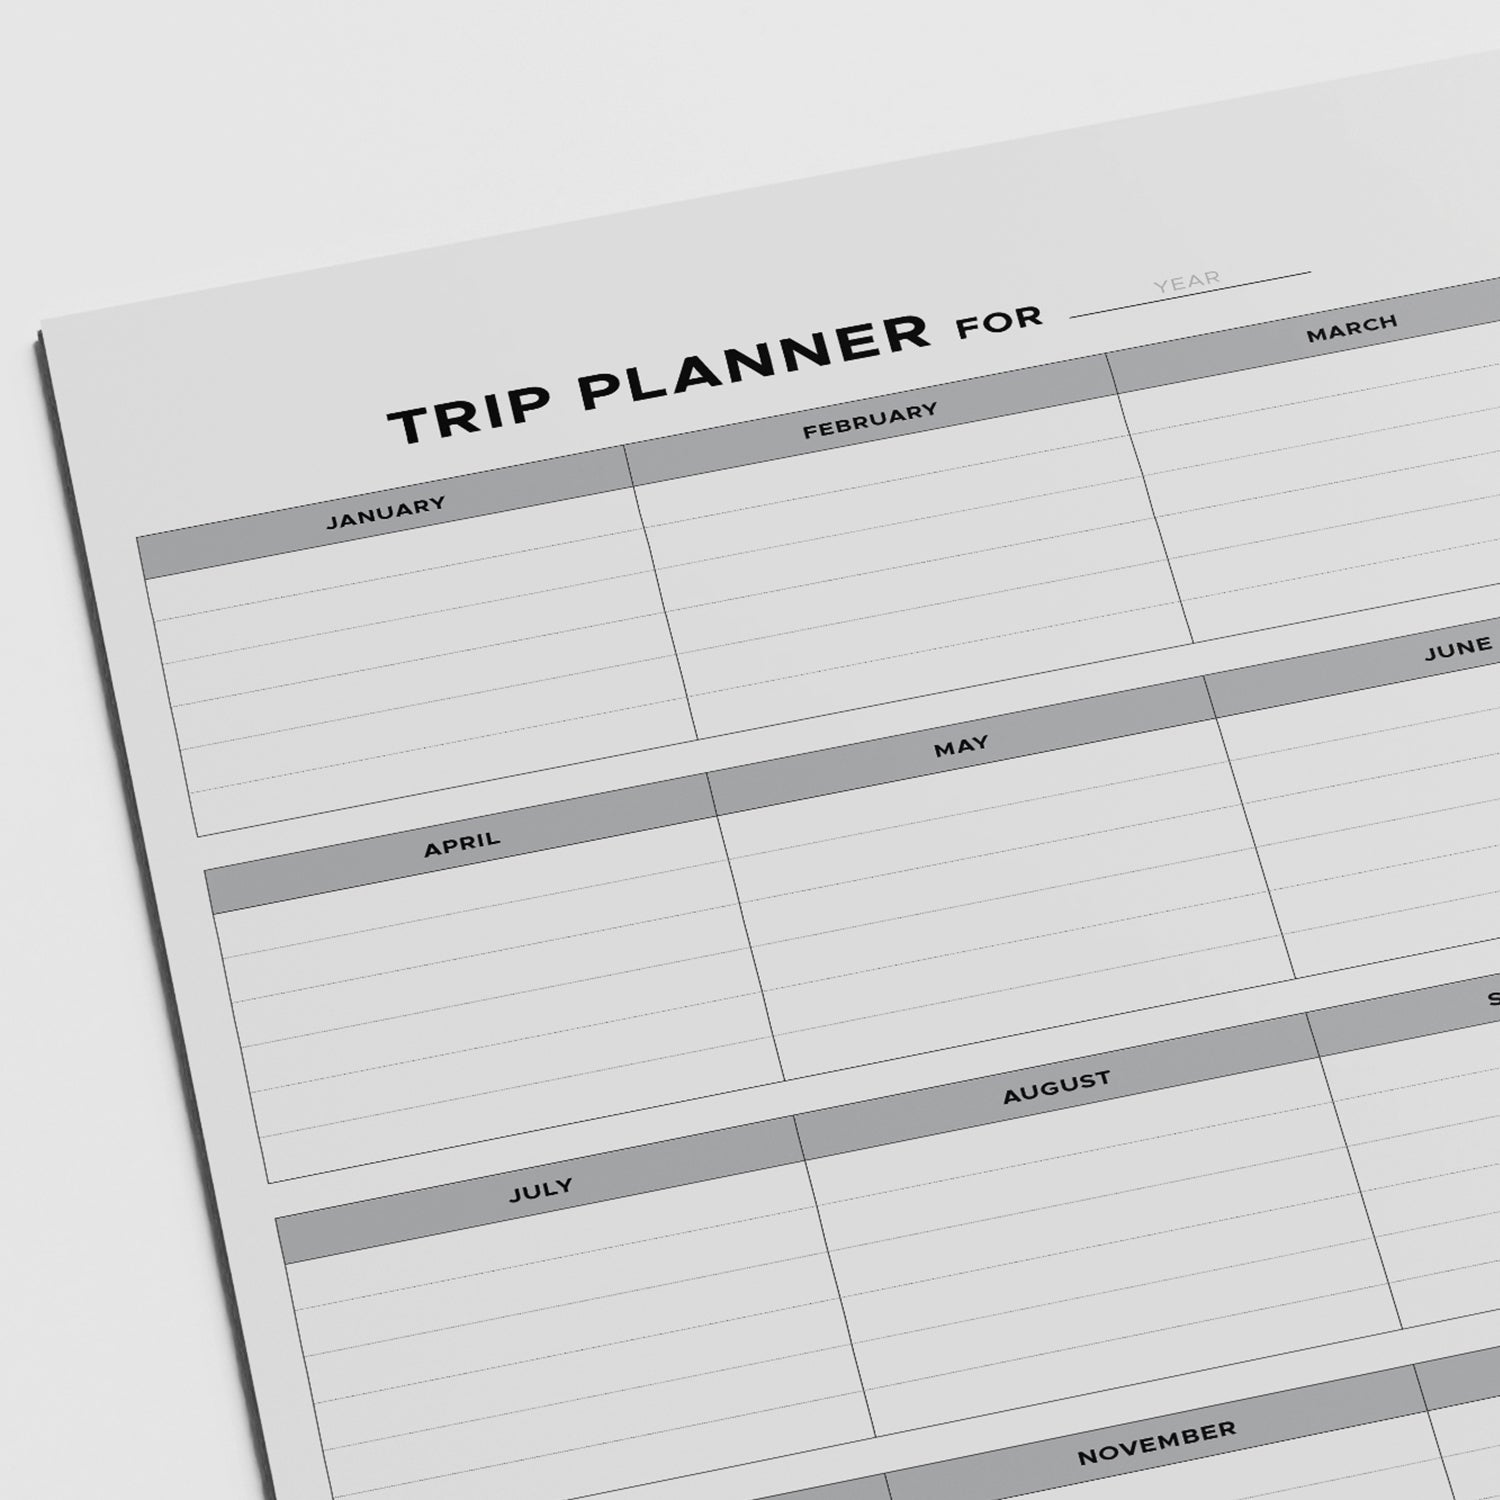 Photo: Sailing Trip Planner featured in All-Weather Sailing Log Book